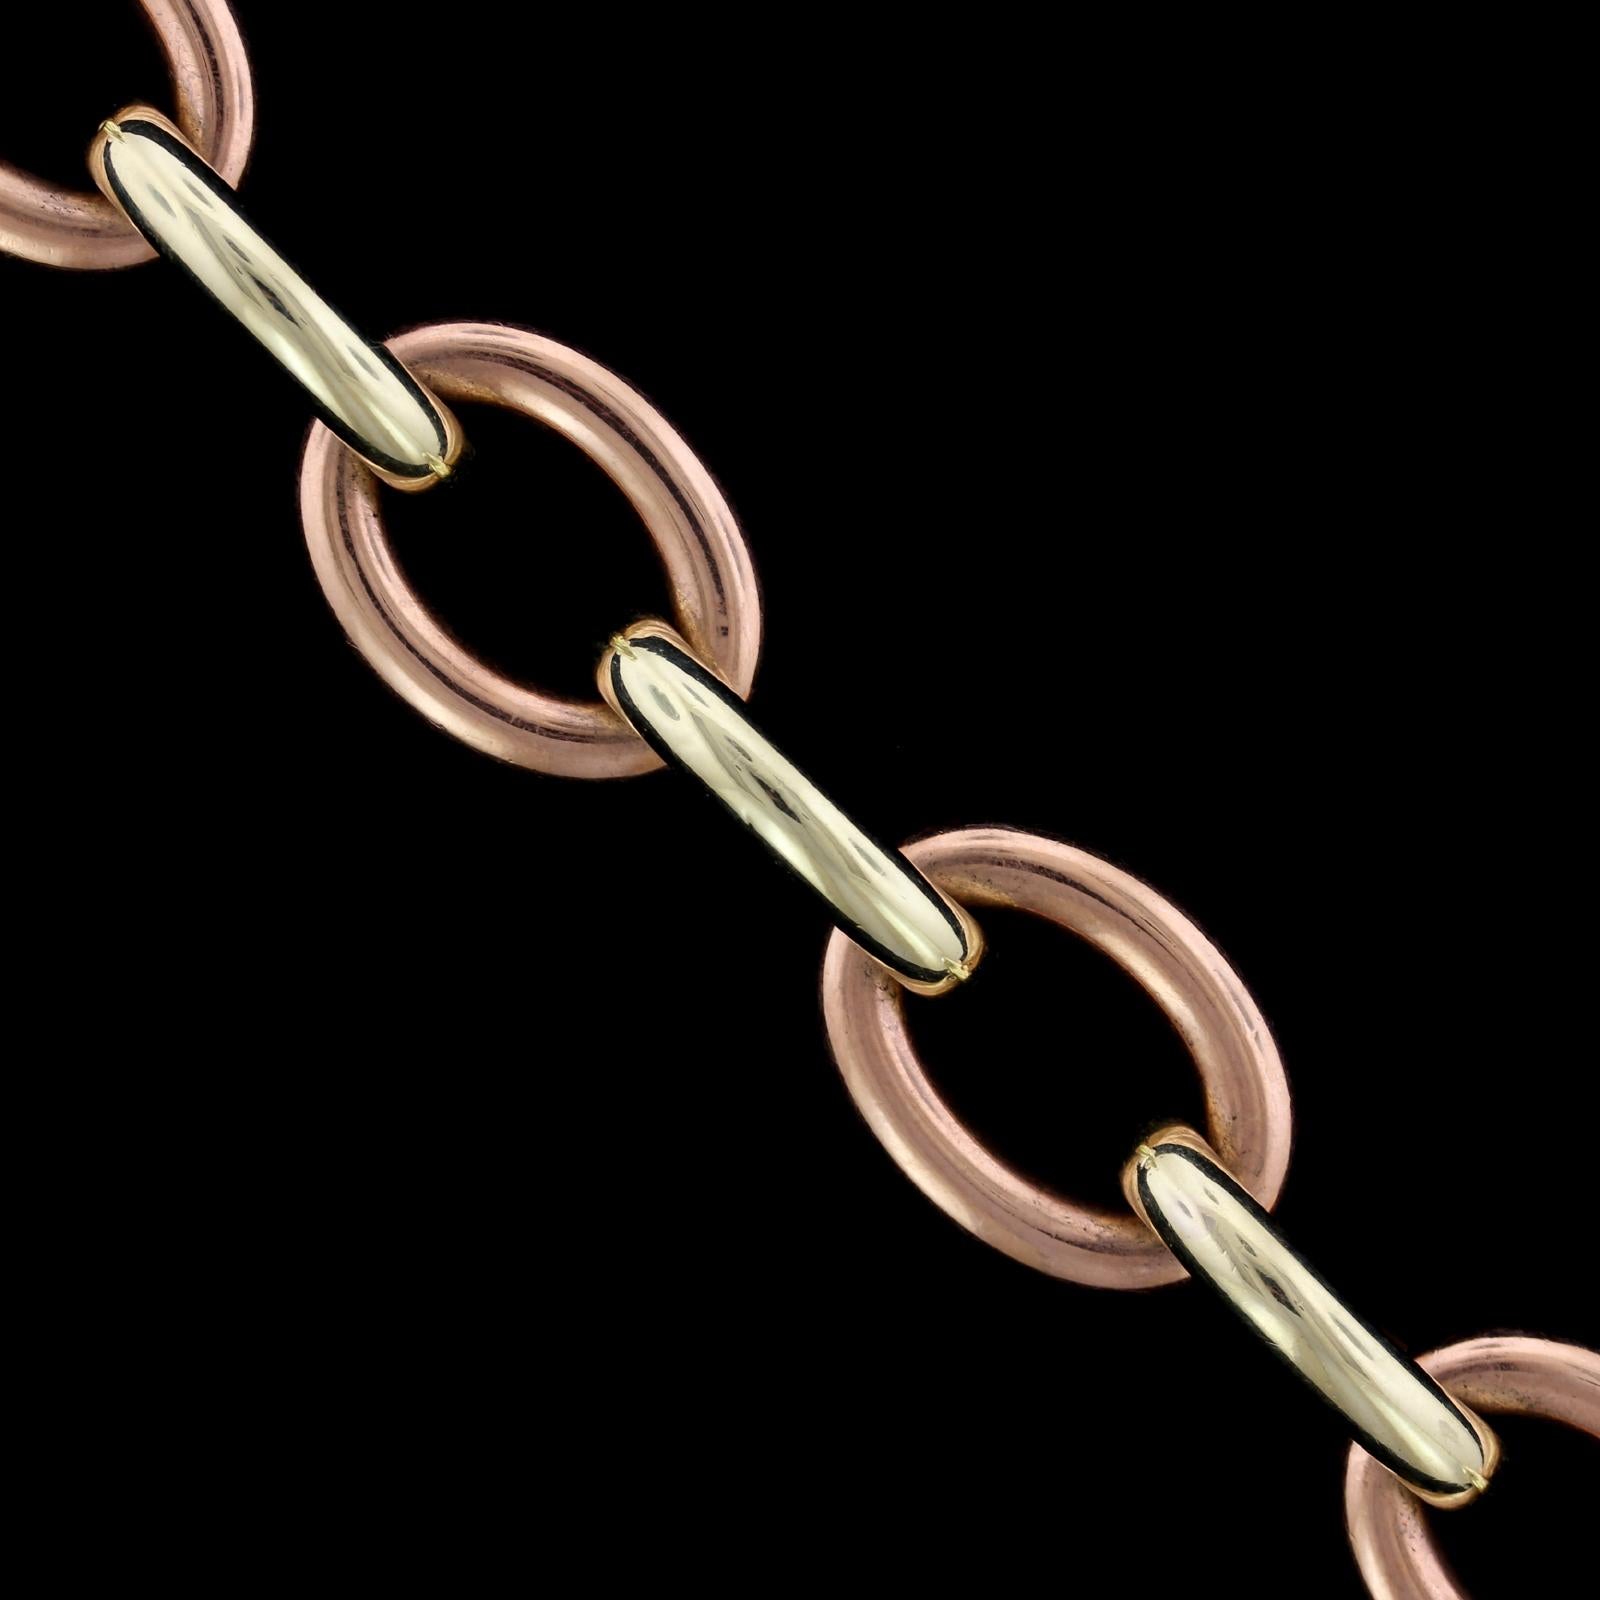 Retro Walter Lampl 14K Rose Gold and Yellow Gold Bracelet. The bracelet is designed with oval and arched links, circa 1940's, length 7 1/2